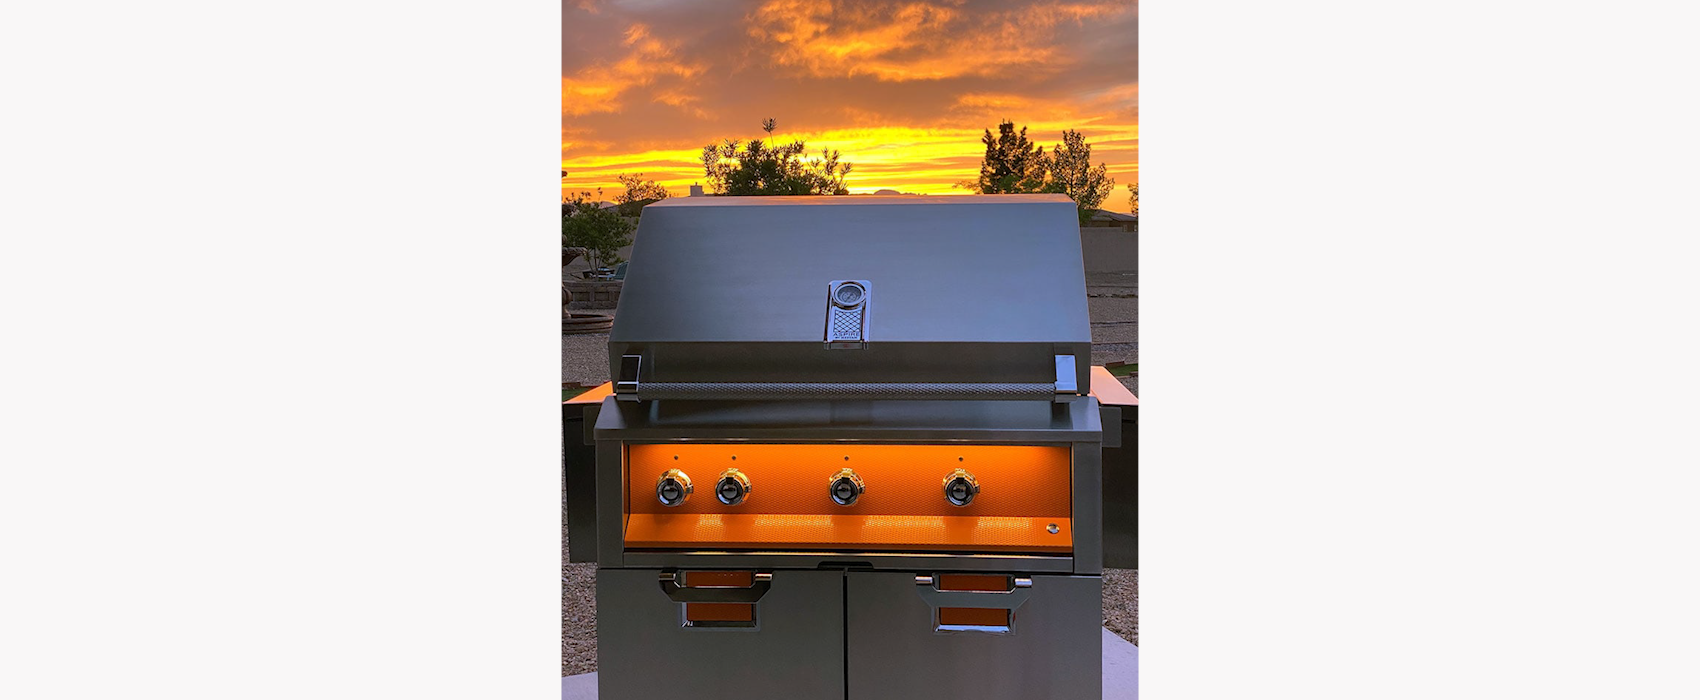 Built In Grill Sunset shot (Citra)